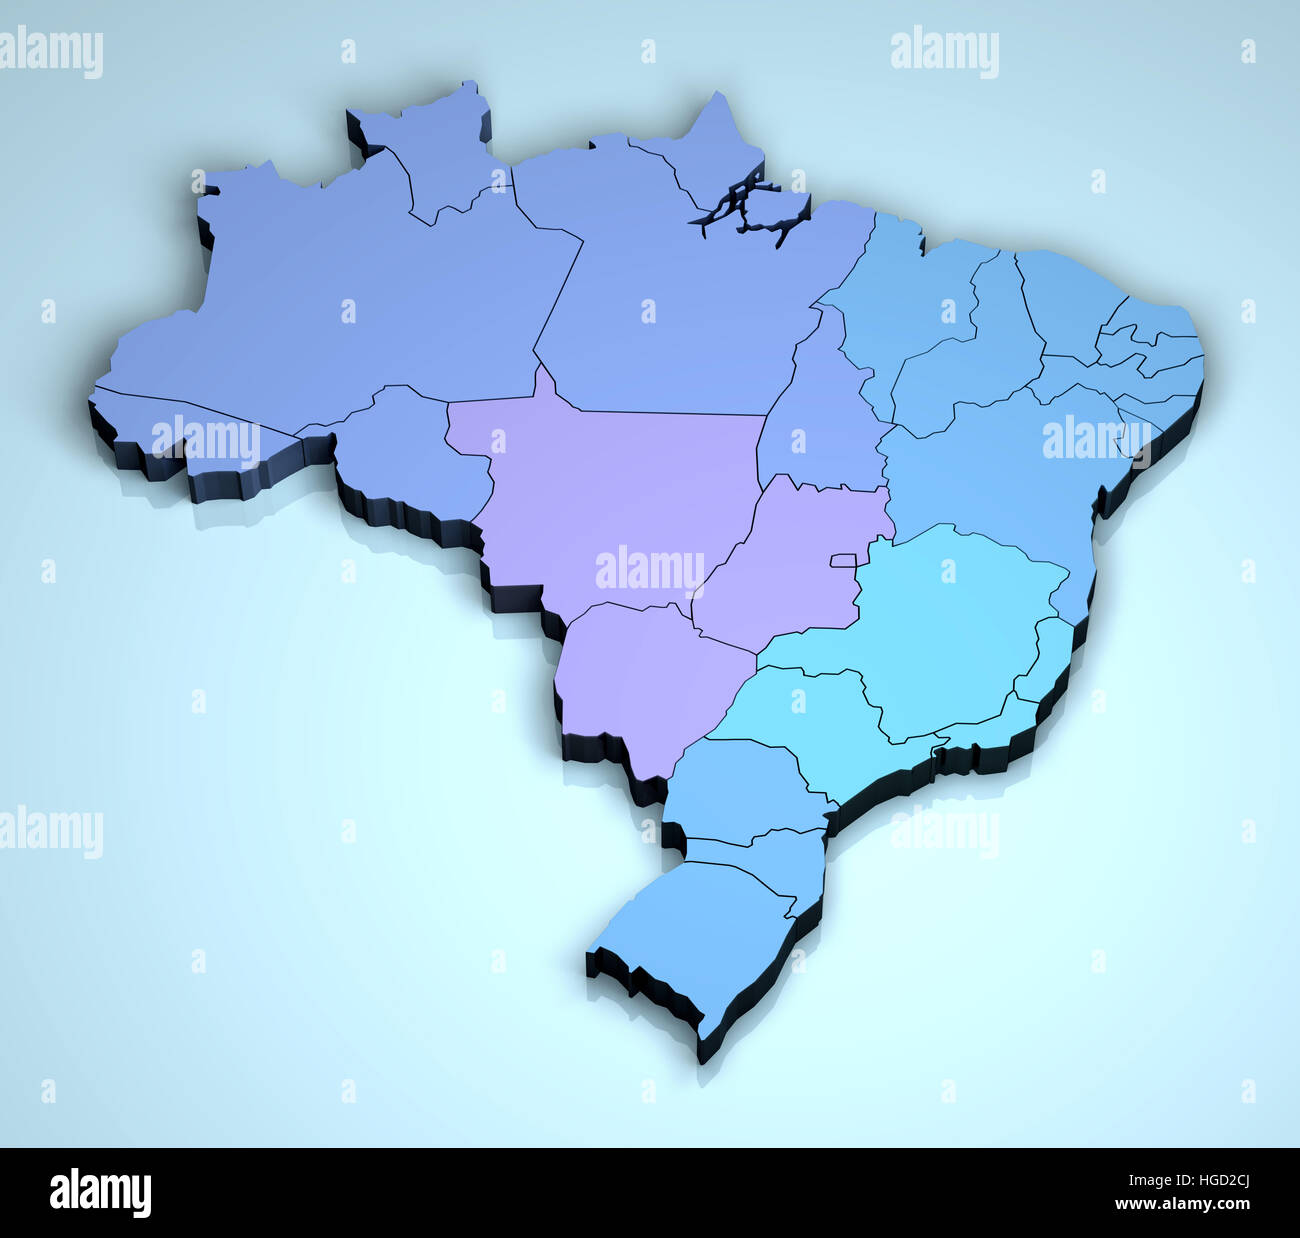 Brazil 3D shape image geographical location Stock Photo - Alamy